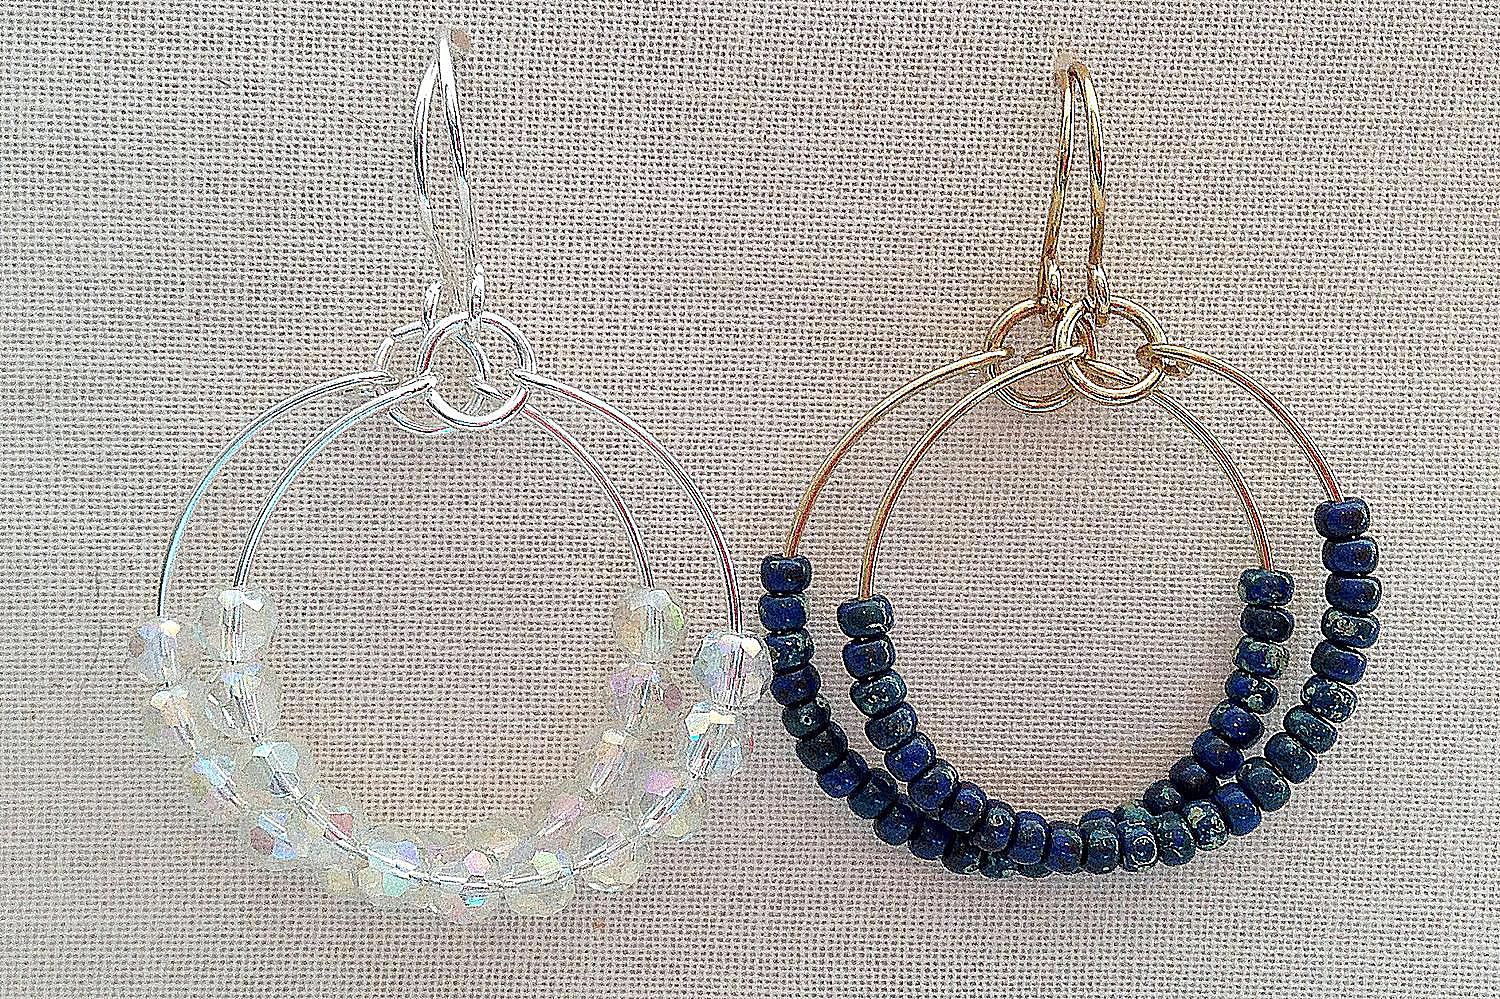 Make Wire and Bead Hoops for Every Mood and Outfit